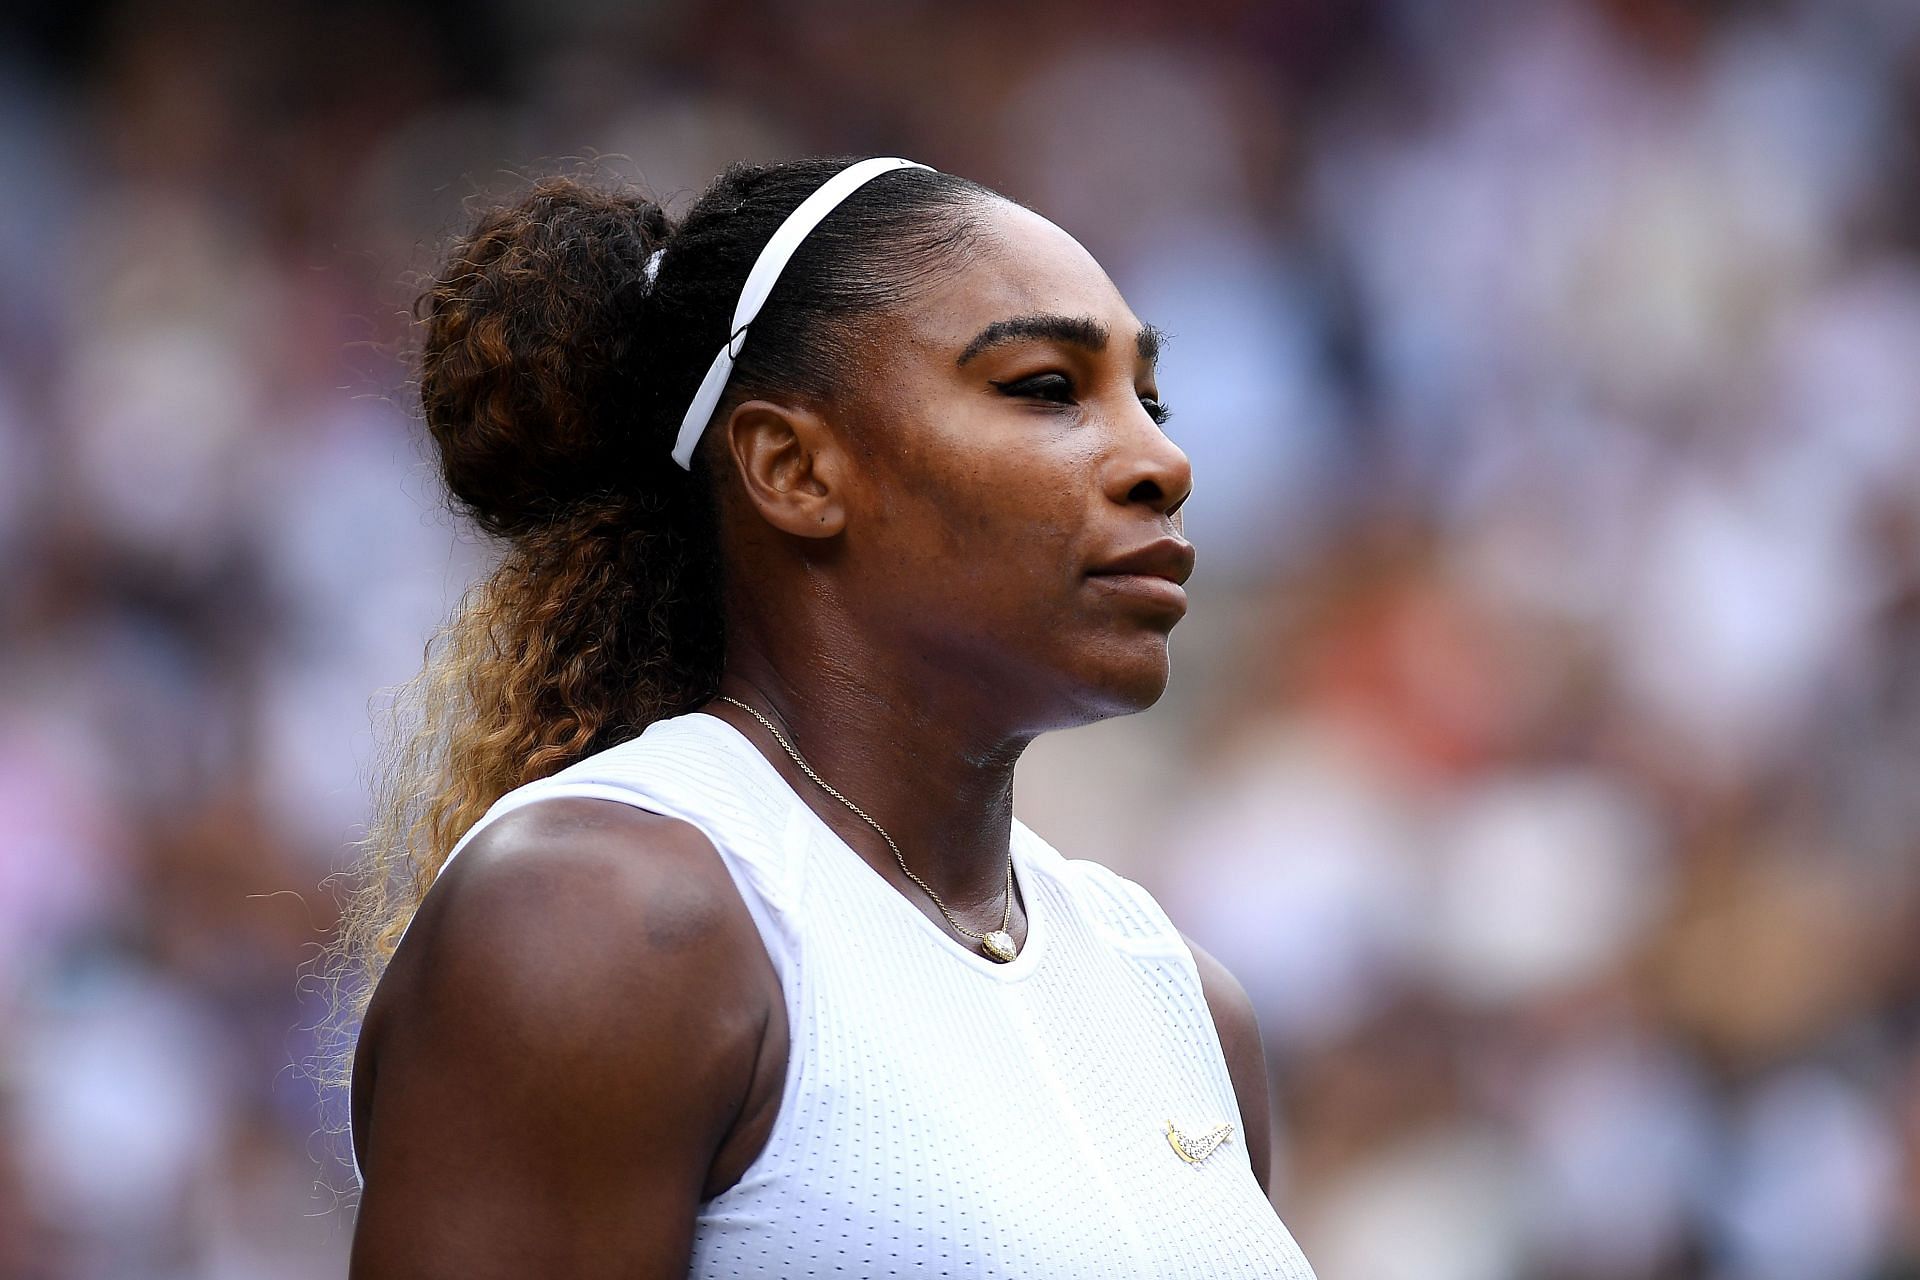 Serena Williams will partner Ons Jabeur for doubles at Eastbourne.